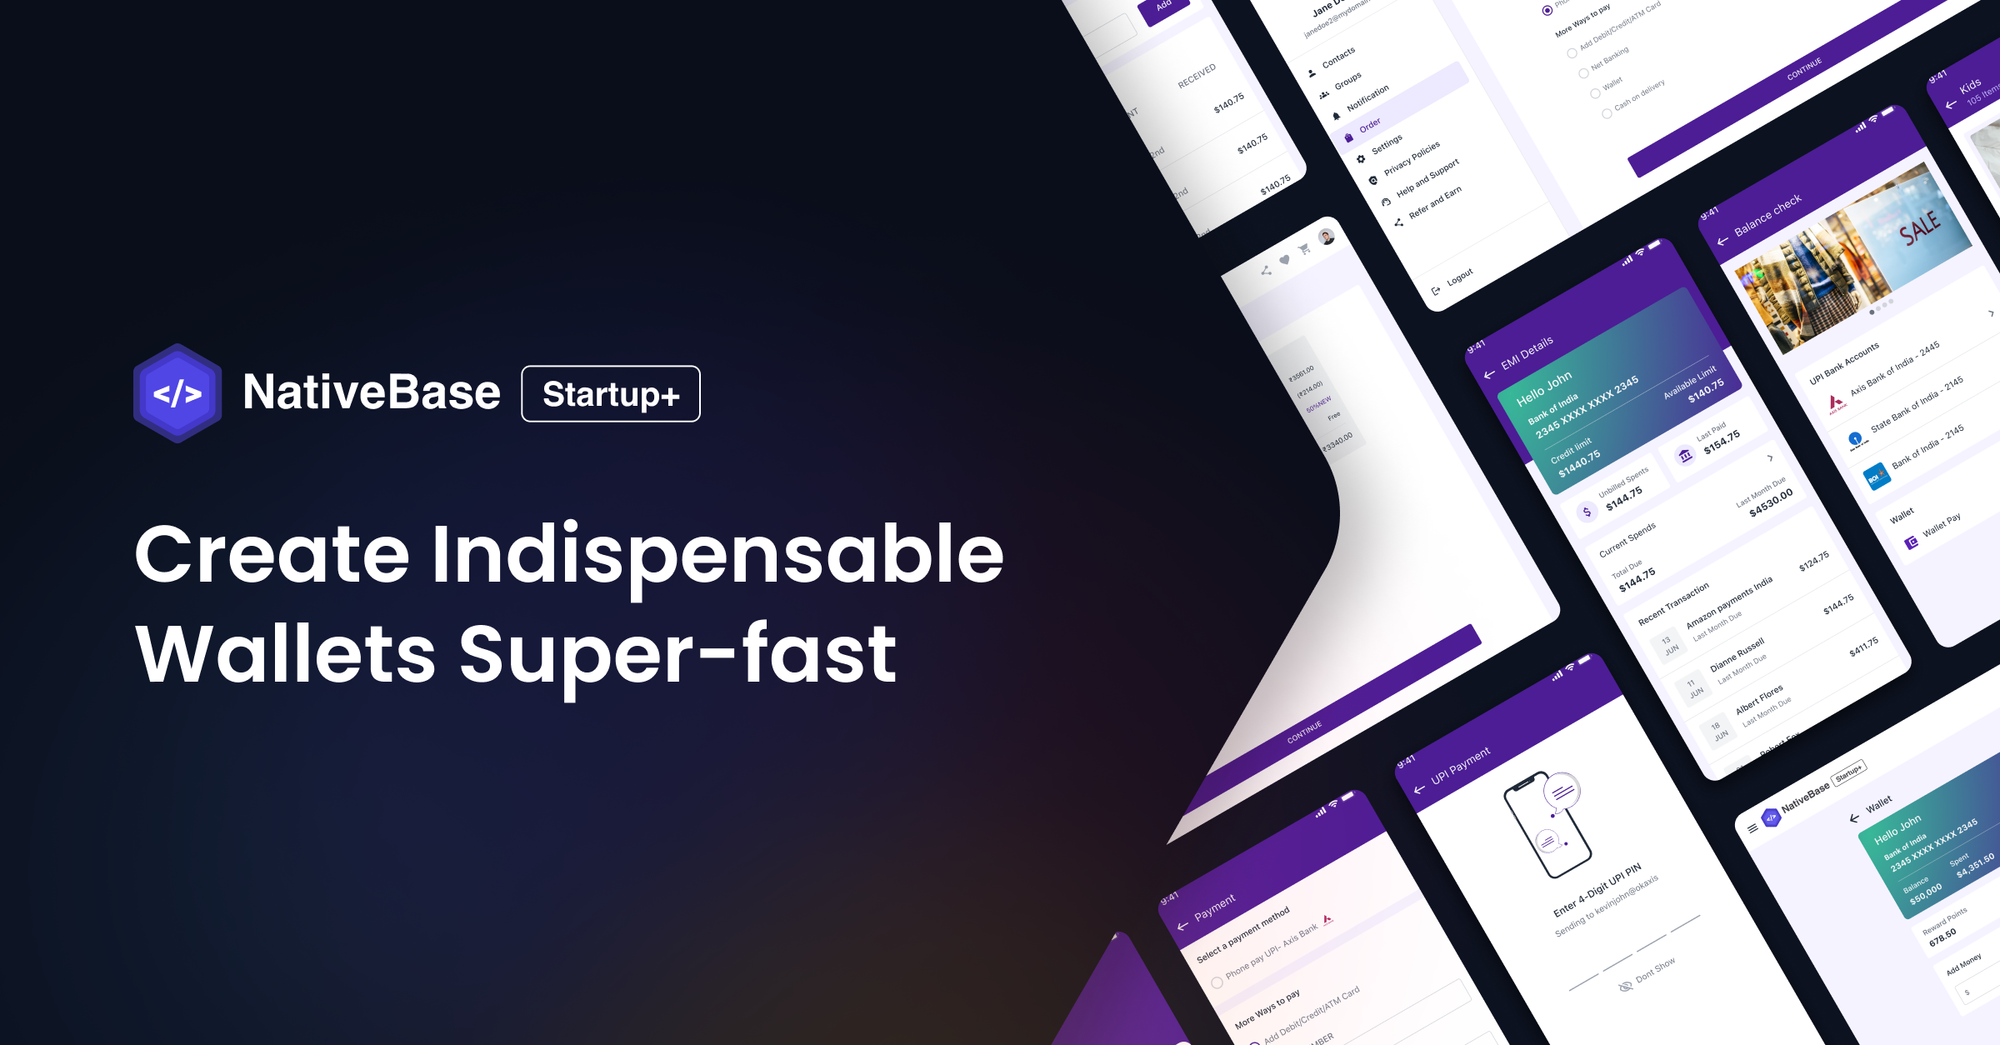 Create Indispensable Wallets Super-fast